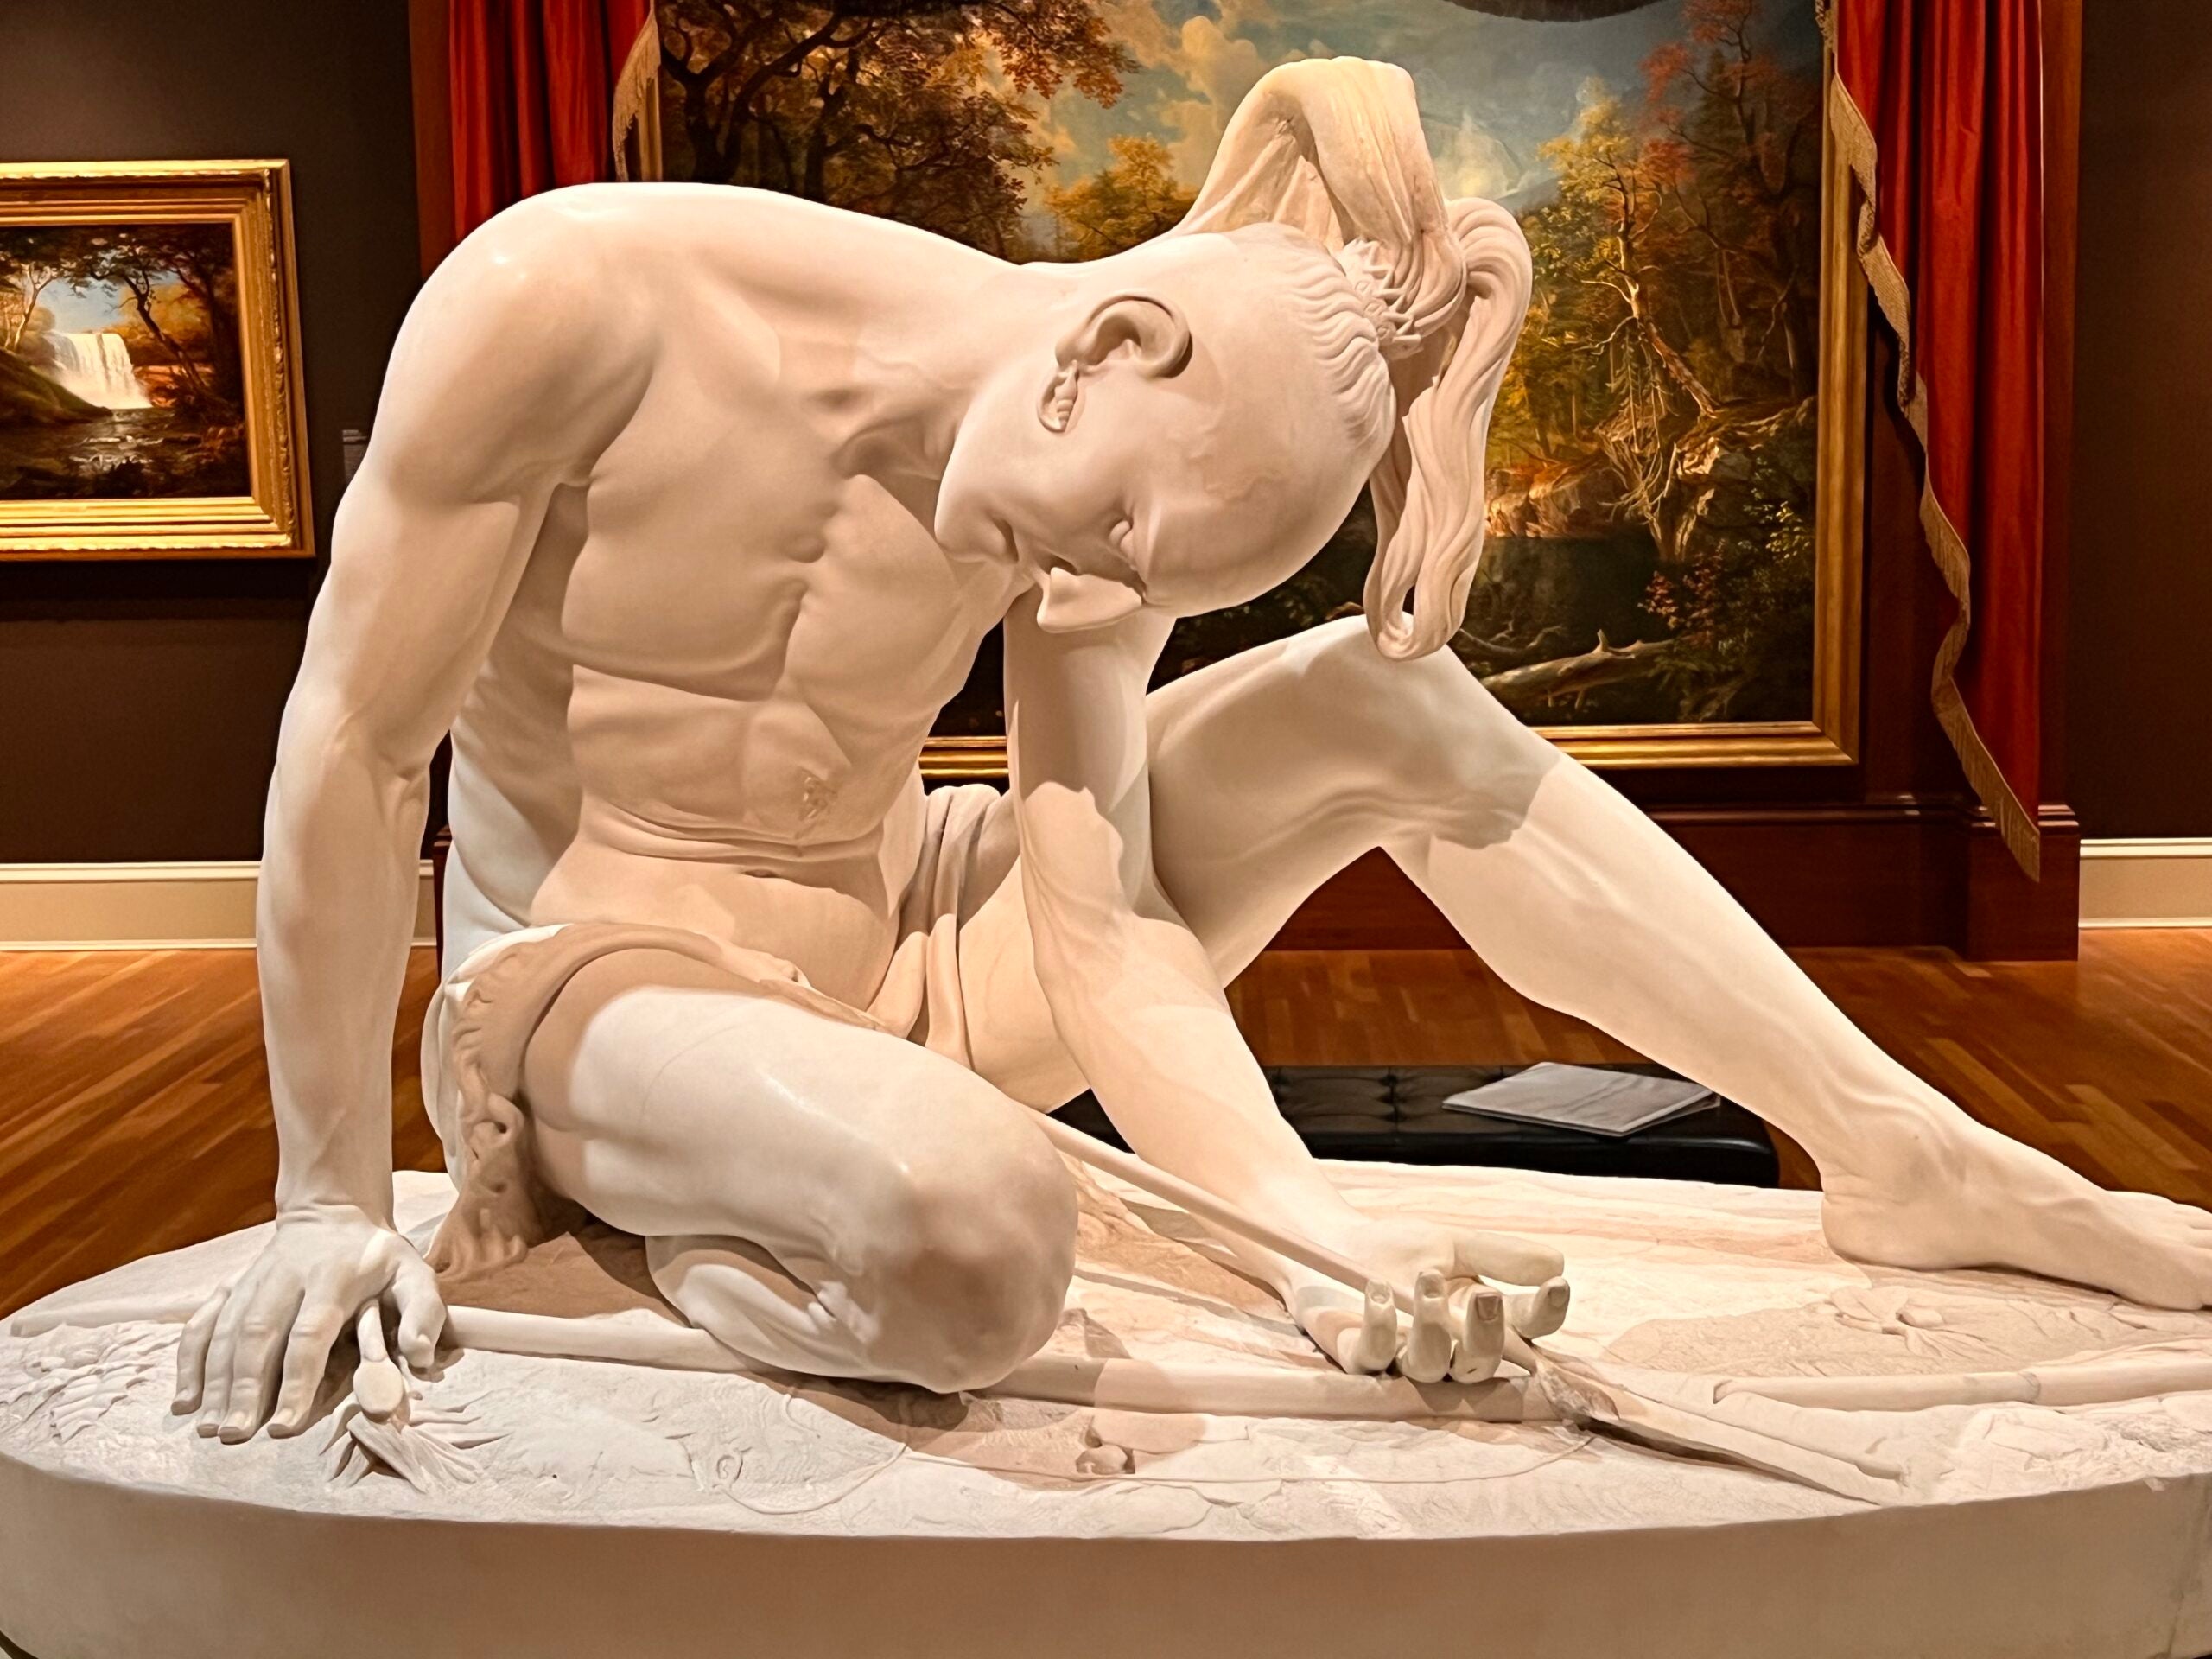 Peter Stephenson’s sculpture “The Wounded Indian.”